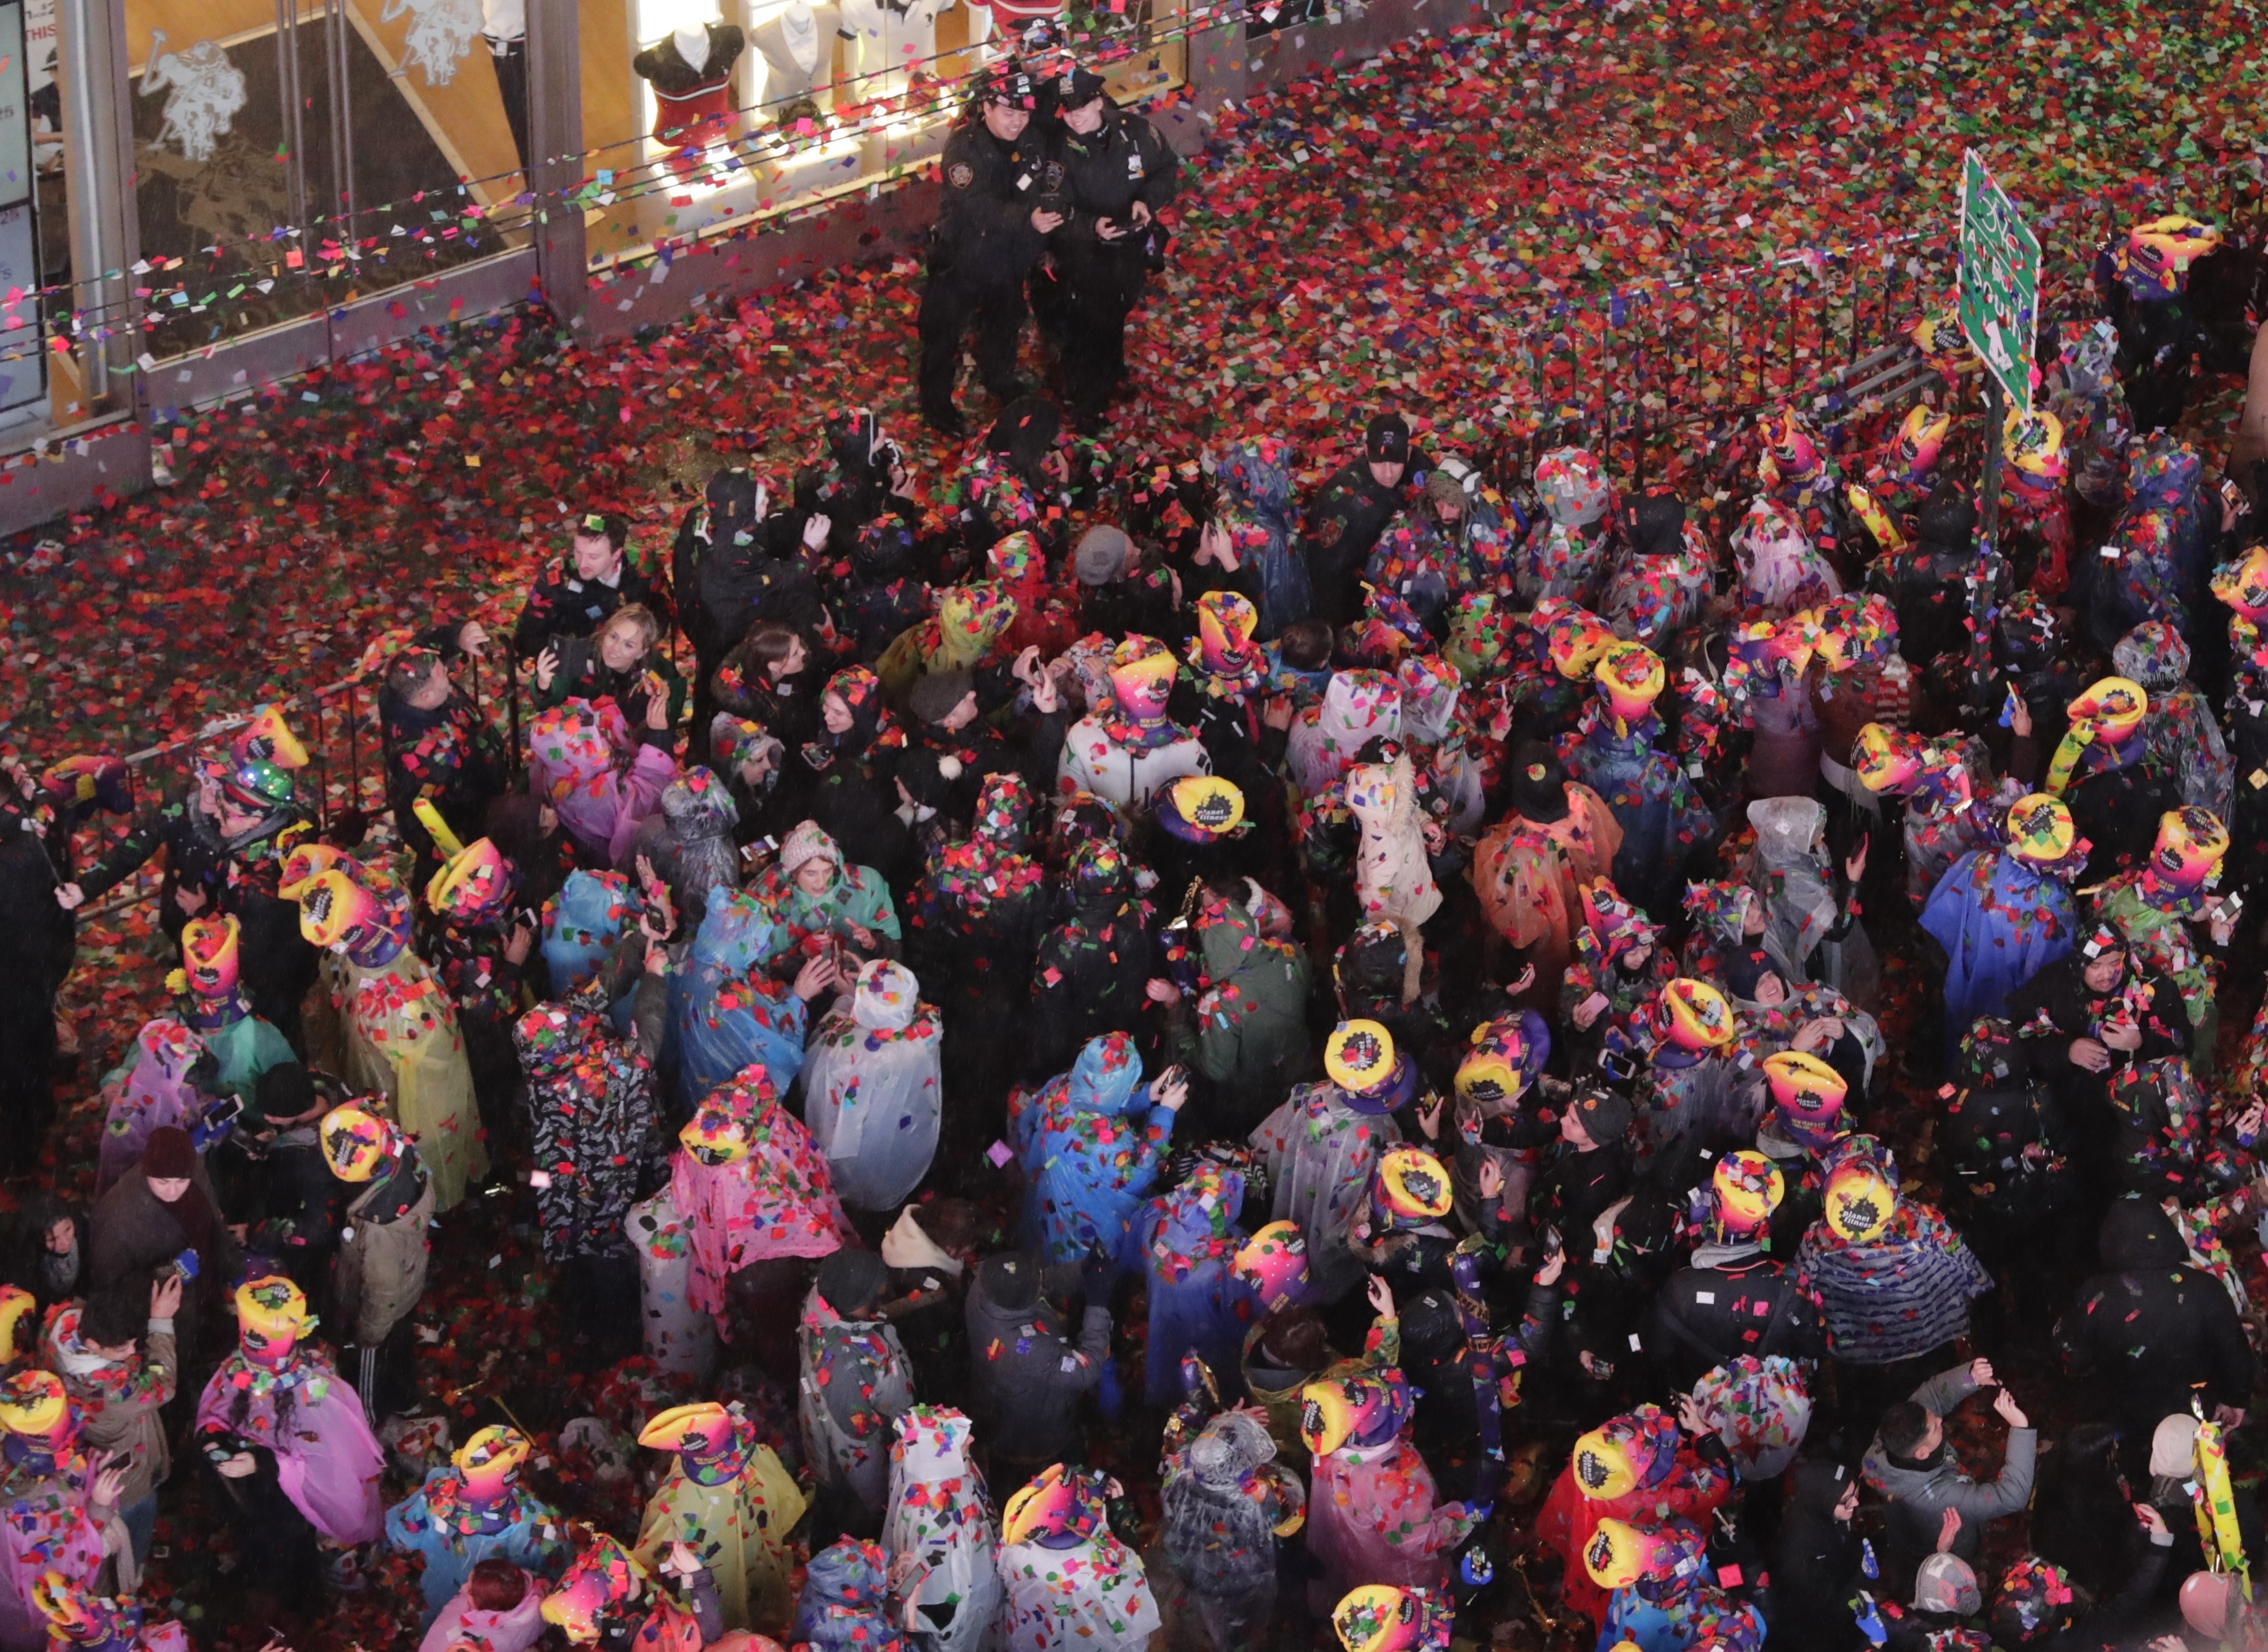 Confetti covers the crowd during the New Year's celebration in Times Square, New York 